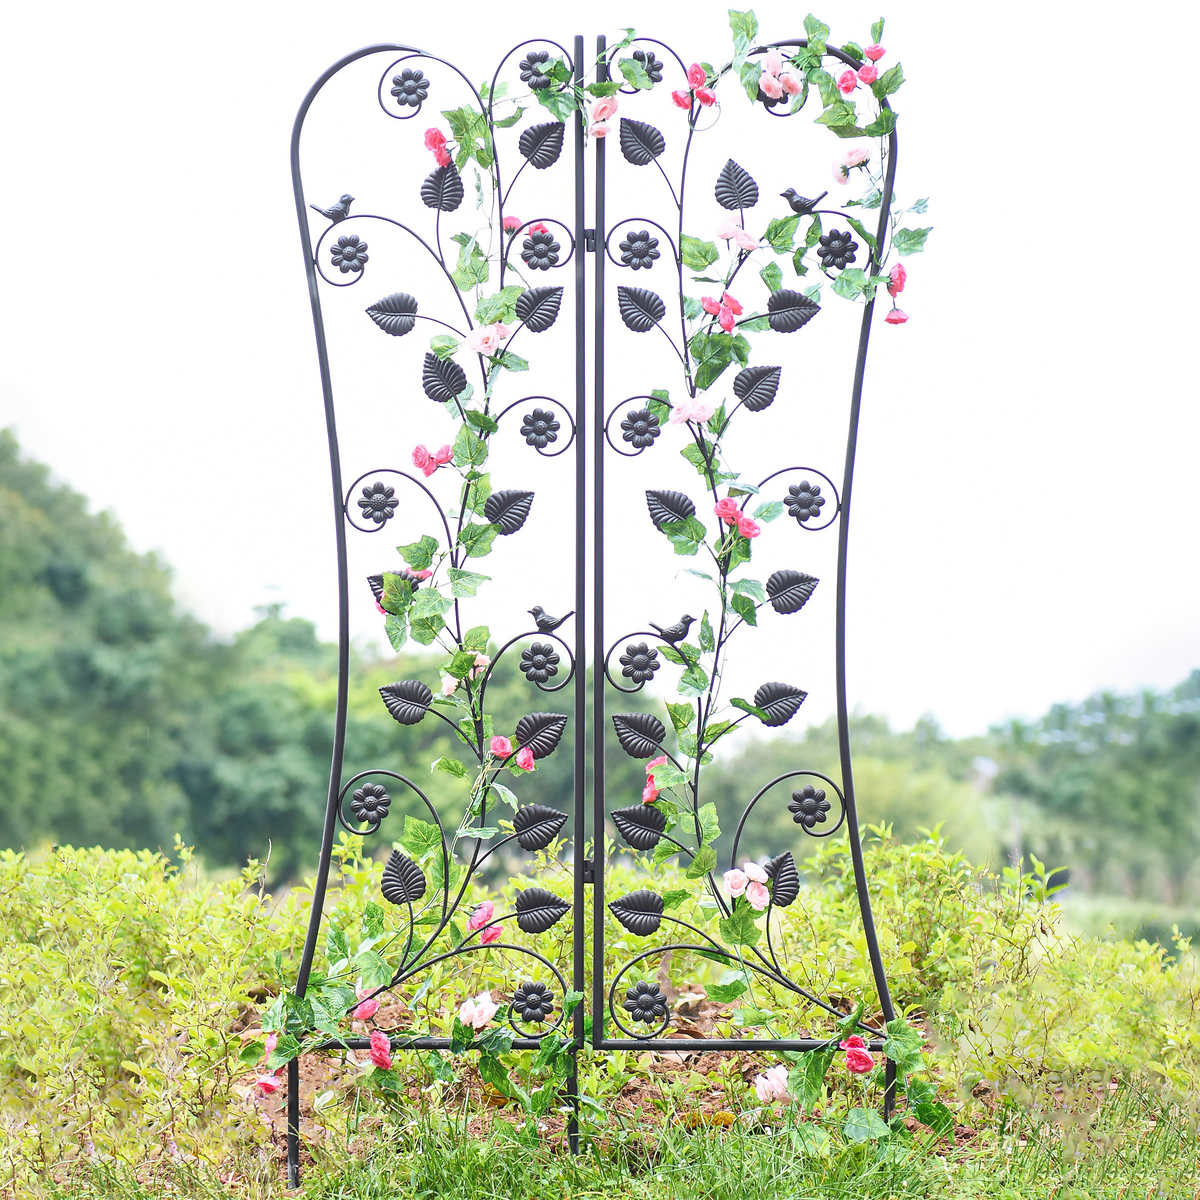 65" Wrought Iron Mable Trellis Metal Support For Vines & Flowers 